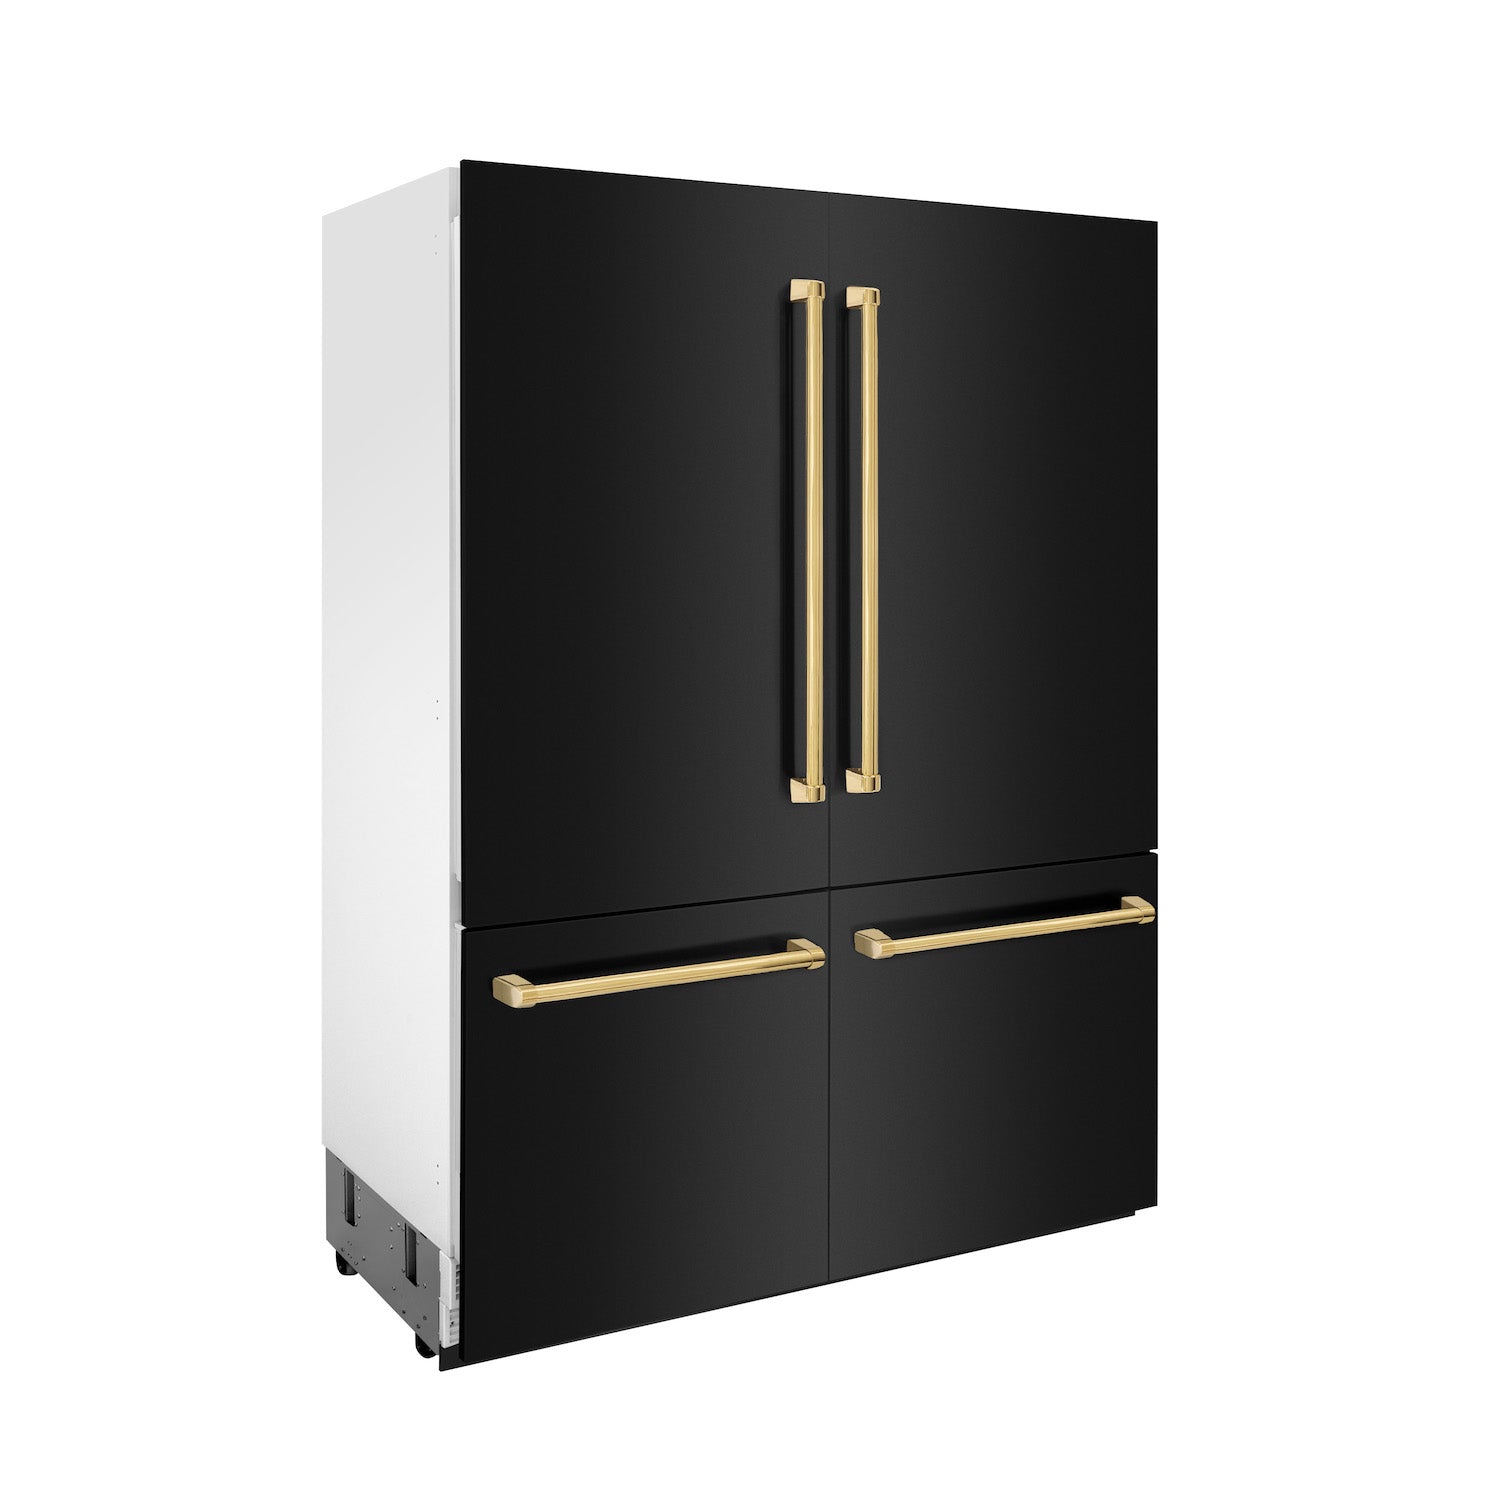 ZLINE Autograph Edition 60 in. 32.2 cu. ft. Built-in 4-Door French Door Refrigerator with Internal Water and Ice Dispenser in Black Stainless Steel with Polished Gold Accents (RBIVZ-BS-60-G) side.